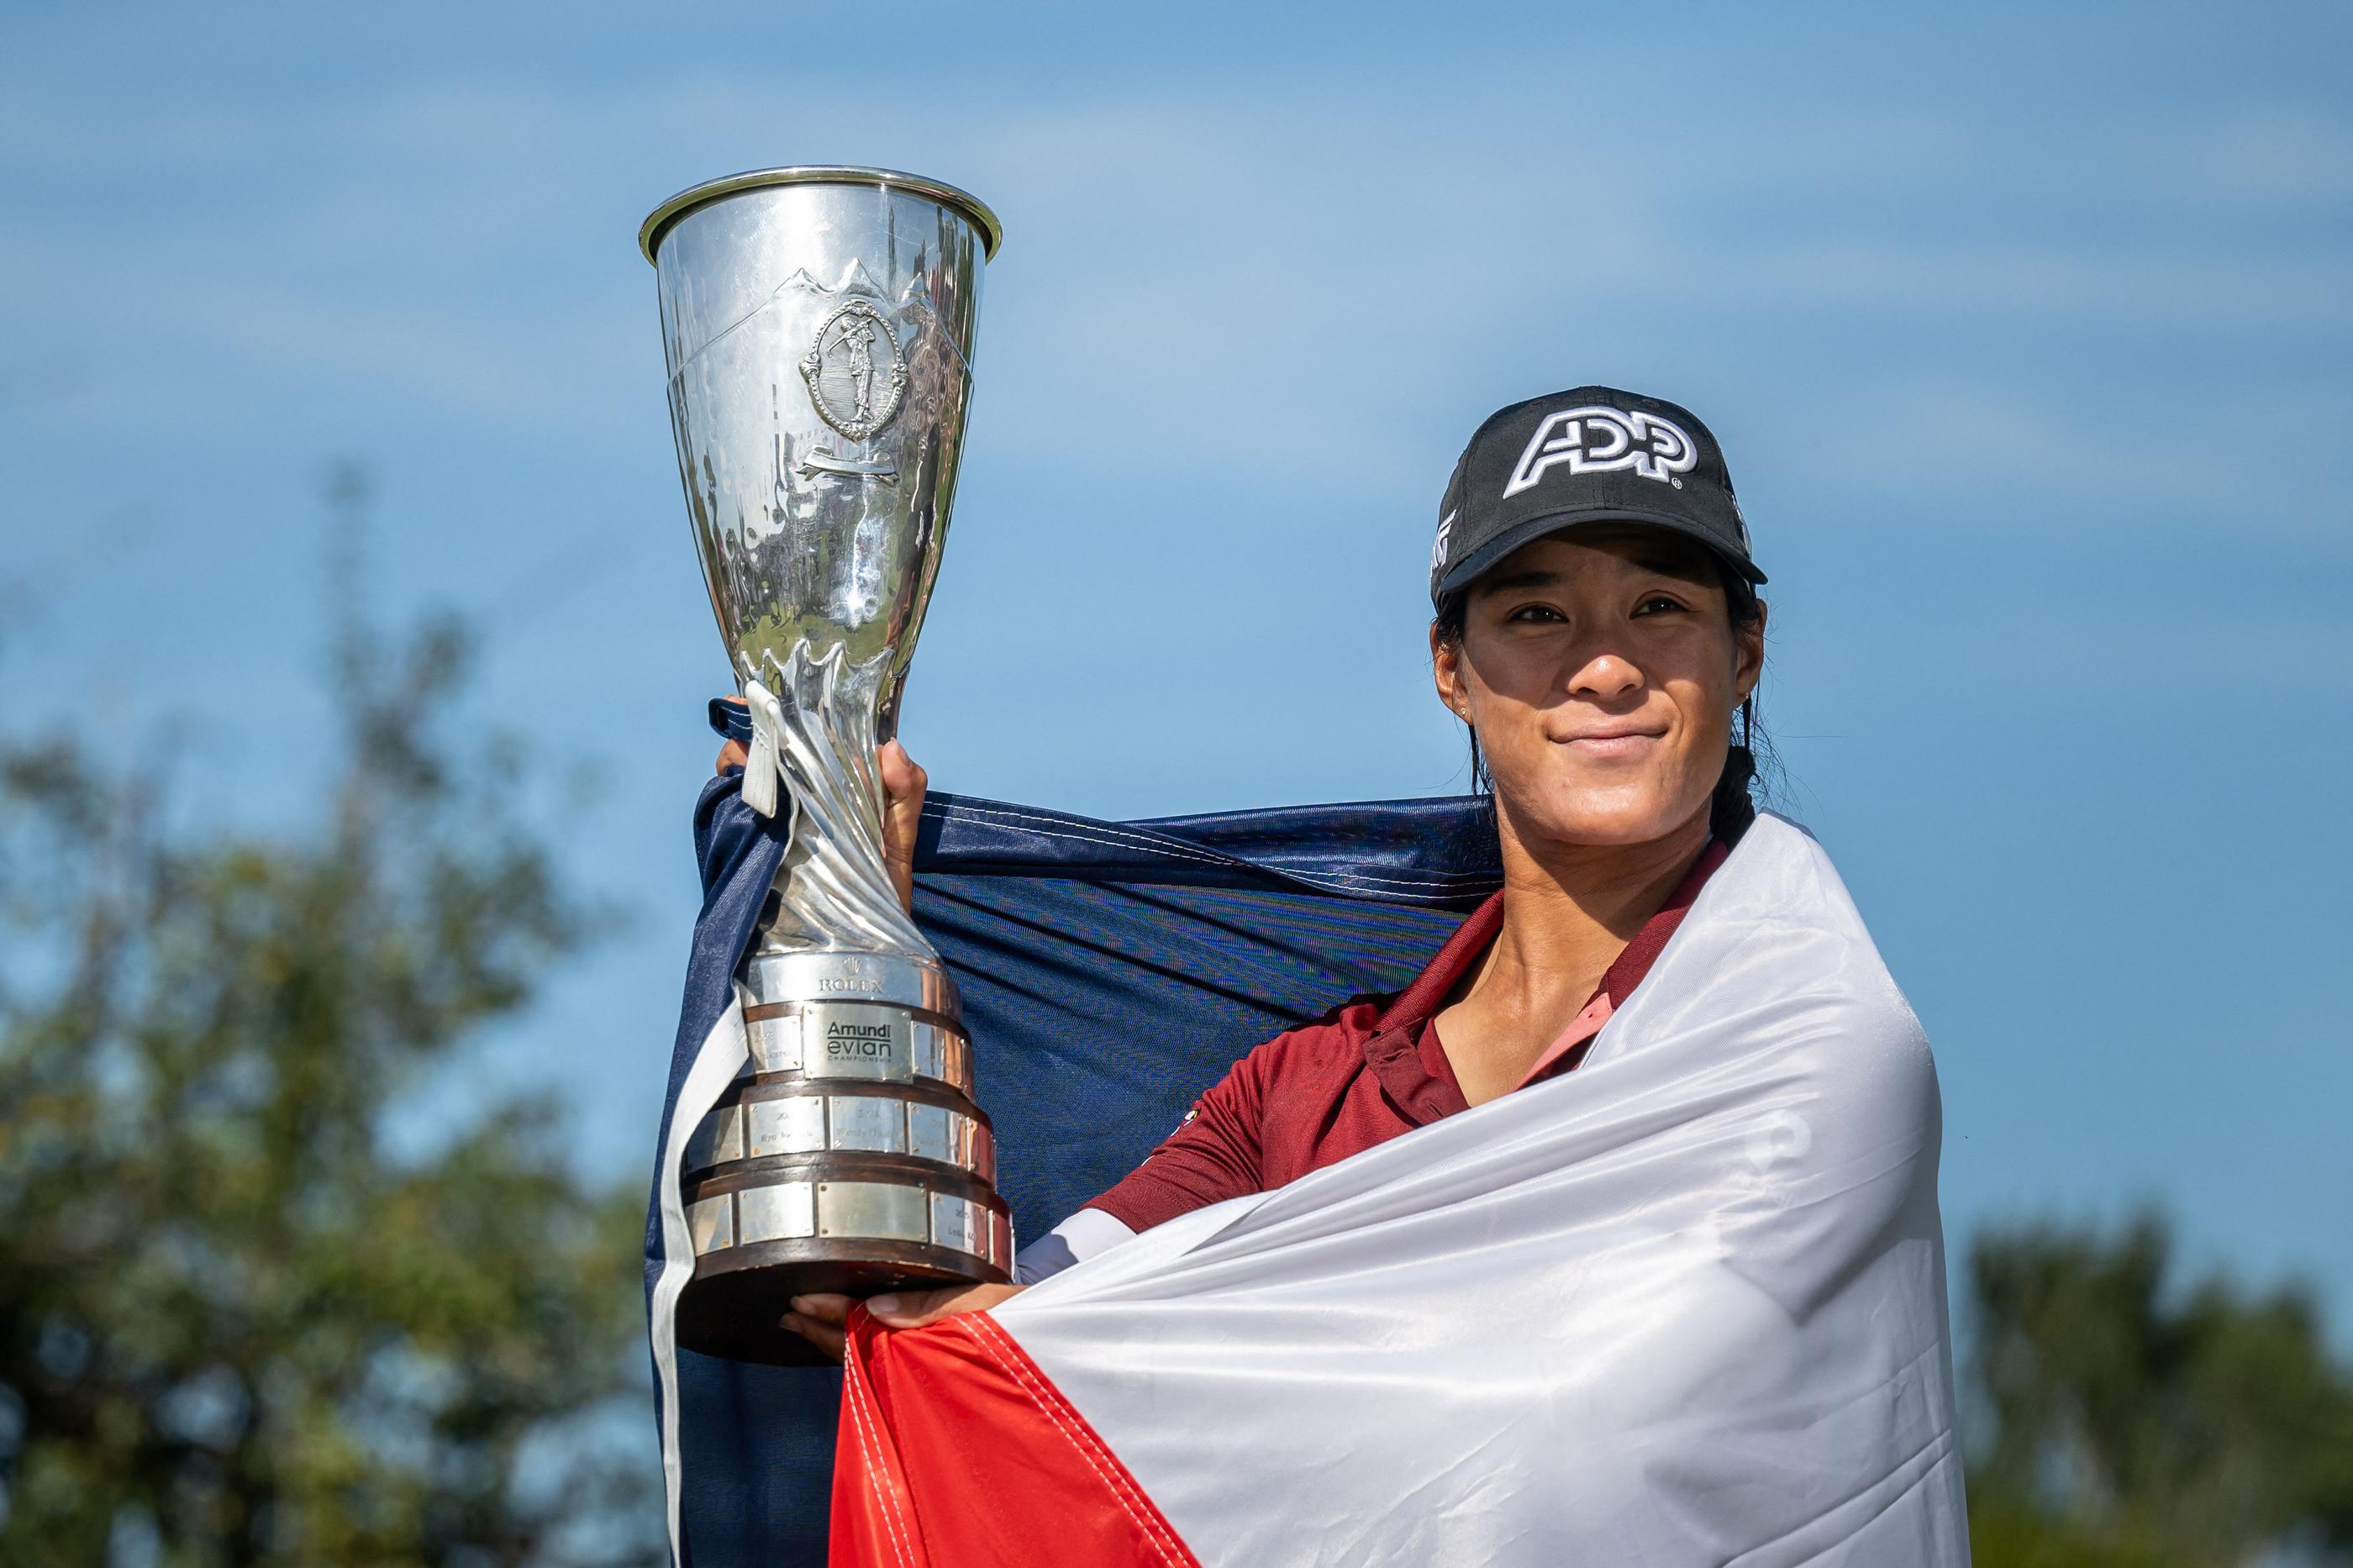 TOPSHOT - France's Celine Boutier, wrapped in a French flag, poses with her trophy after winning the Evian Championship, a women's LPGA major golf tournament in Evian-les-Bains, French Alps, on July 30, 2023. (Photo by Fabrice COFFRINI / AFP)